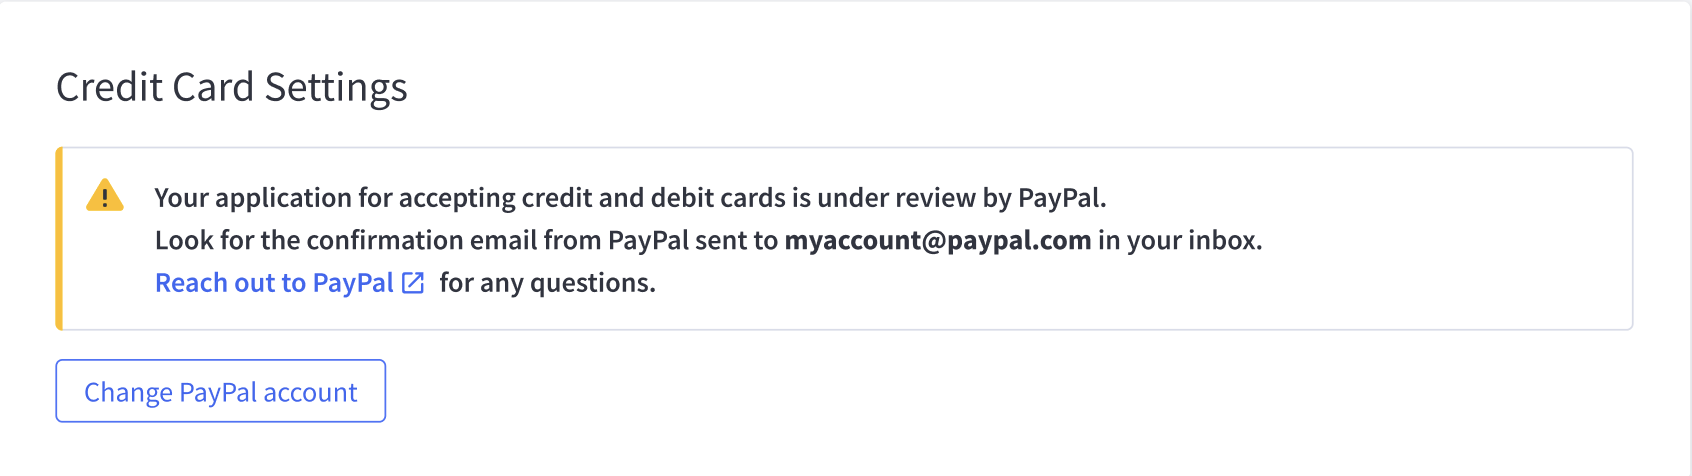 Approval status message in PayPal settings